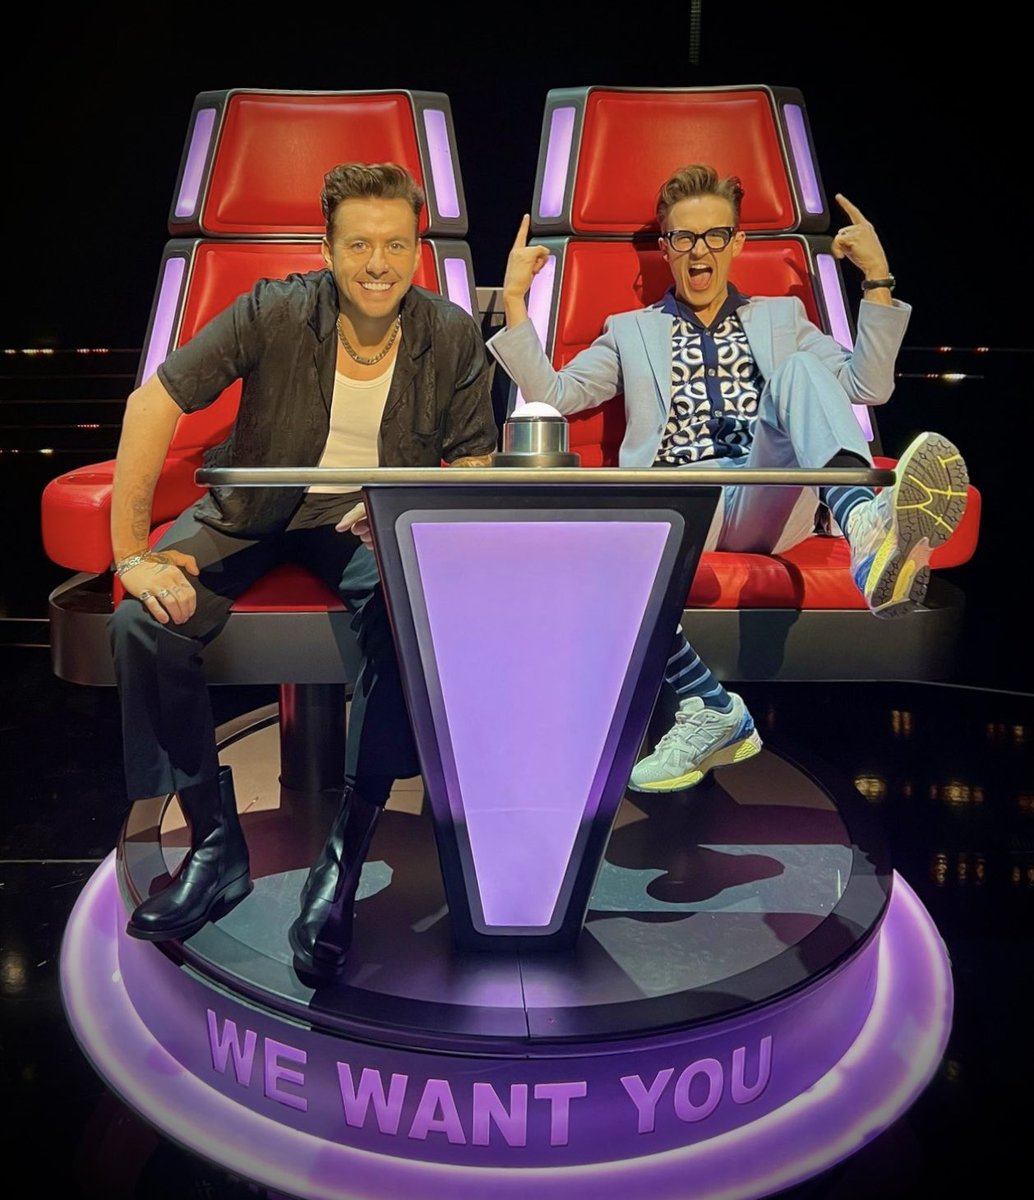 First look at Danny & Tom in The Voice UK’s first ever double chair! 

The 13th series of #TheVoiceUK is set to air in September later this year 🎤